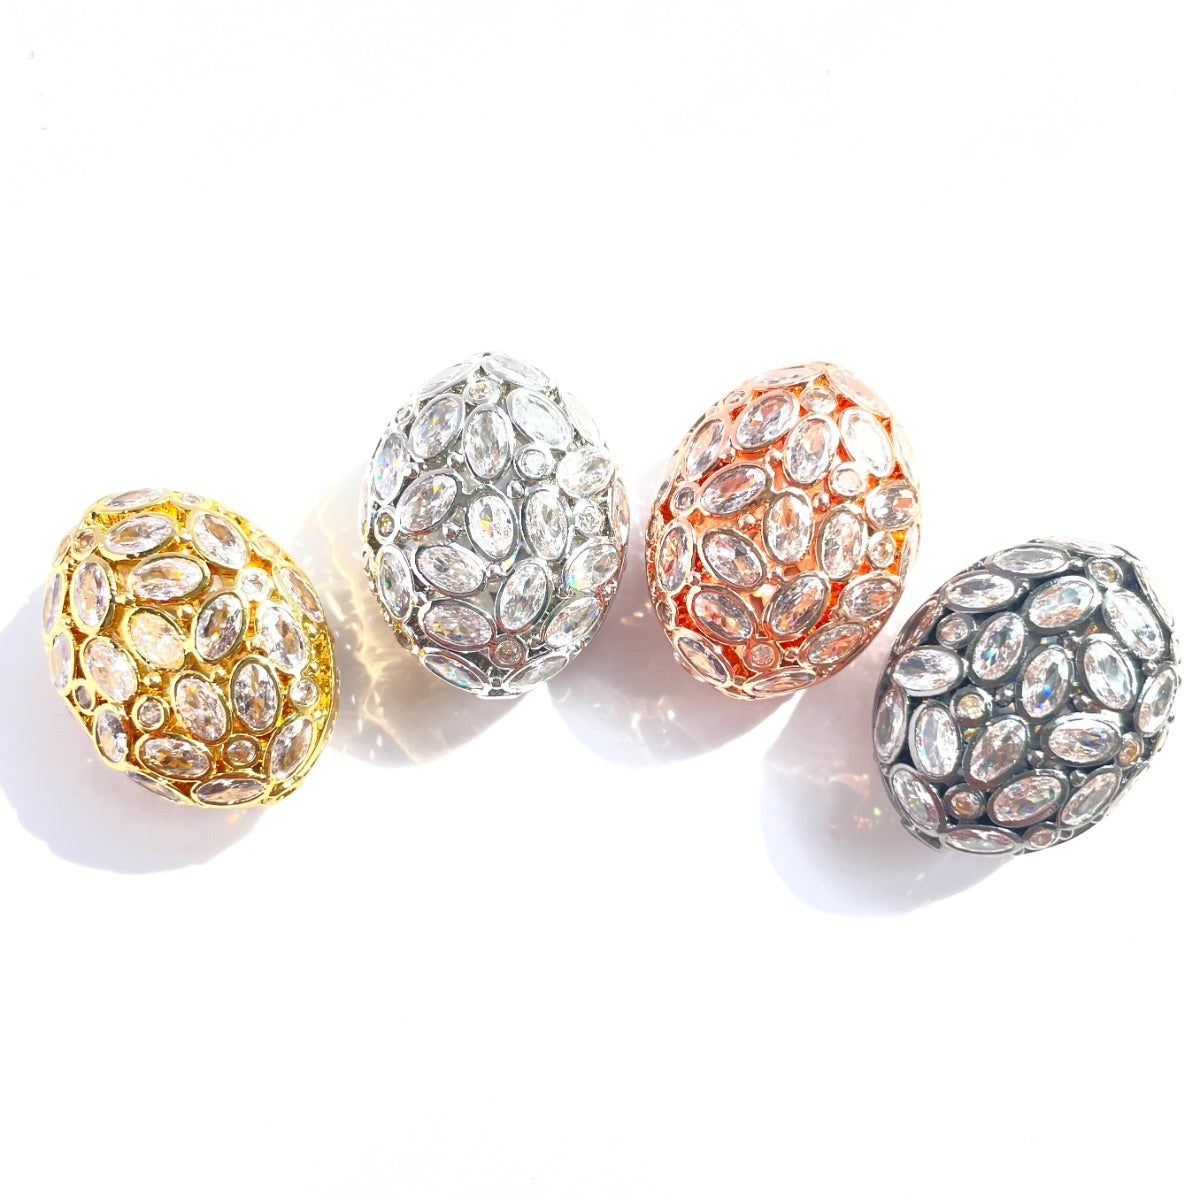 5pc 26.7*21mm Big Size Clear CZ Hollow Flat Oval Centerpiece CZ Egg Beads Spacers CZ Paved Spacers Egg Beads Charms Beads Beyond